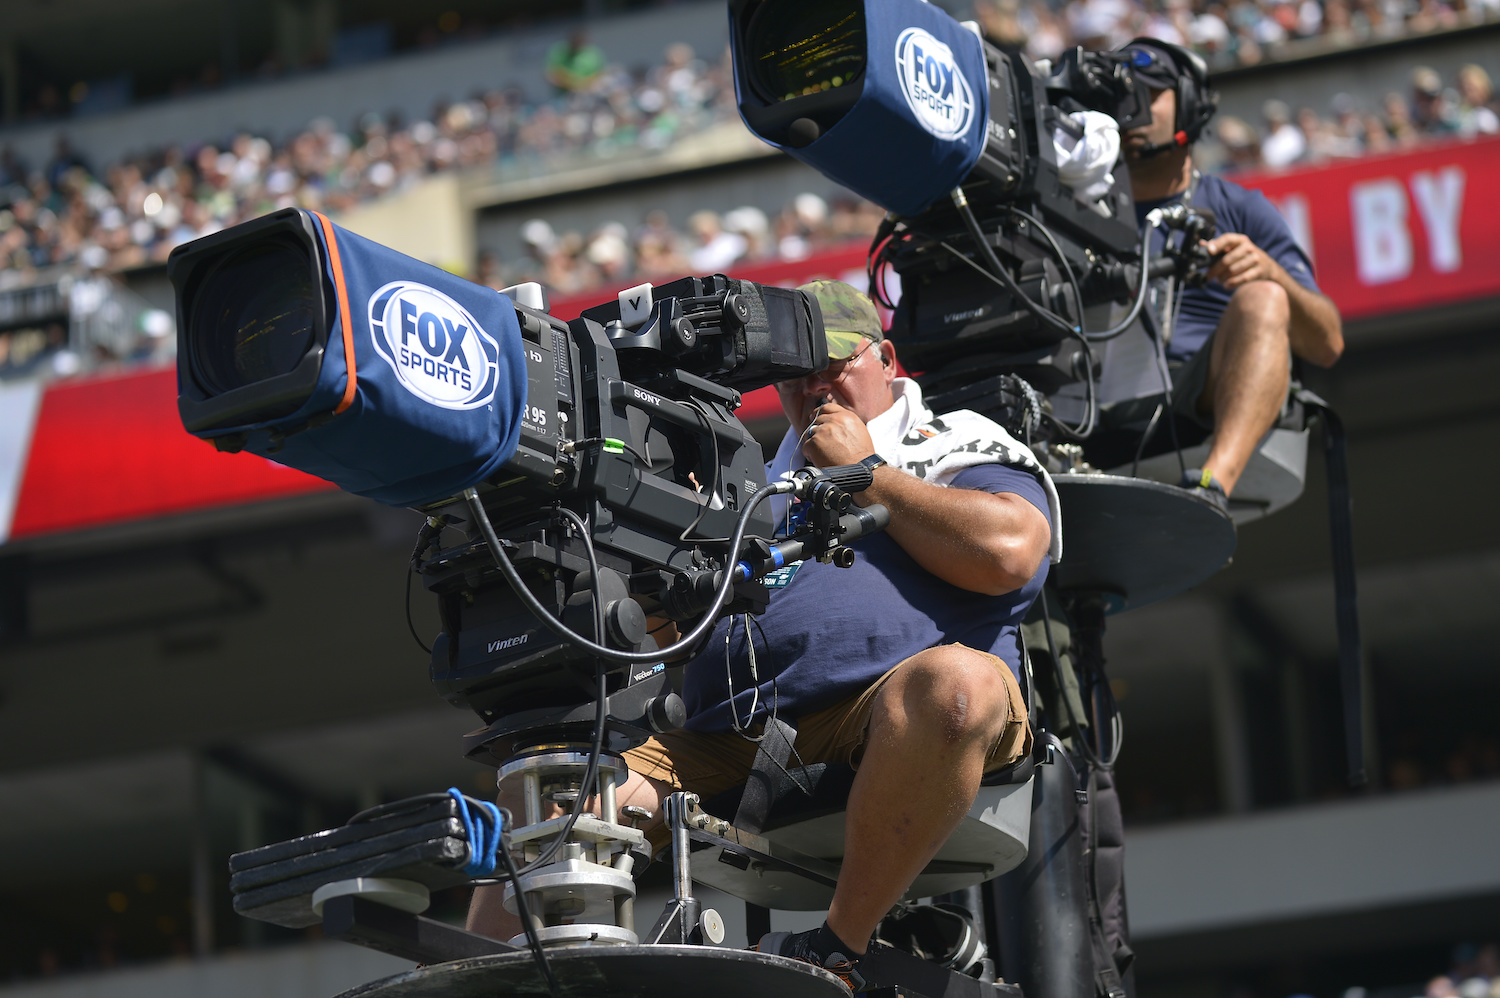 In the midst of sinking rankings and NFL boycott talk, Fox could double its yearly investment in NFL broadcast rights to $2 billion or more.